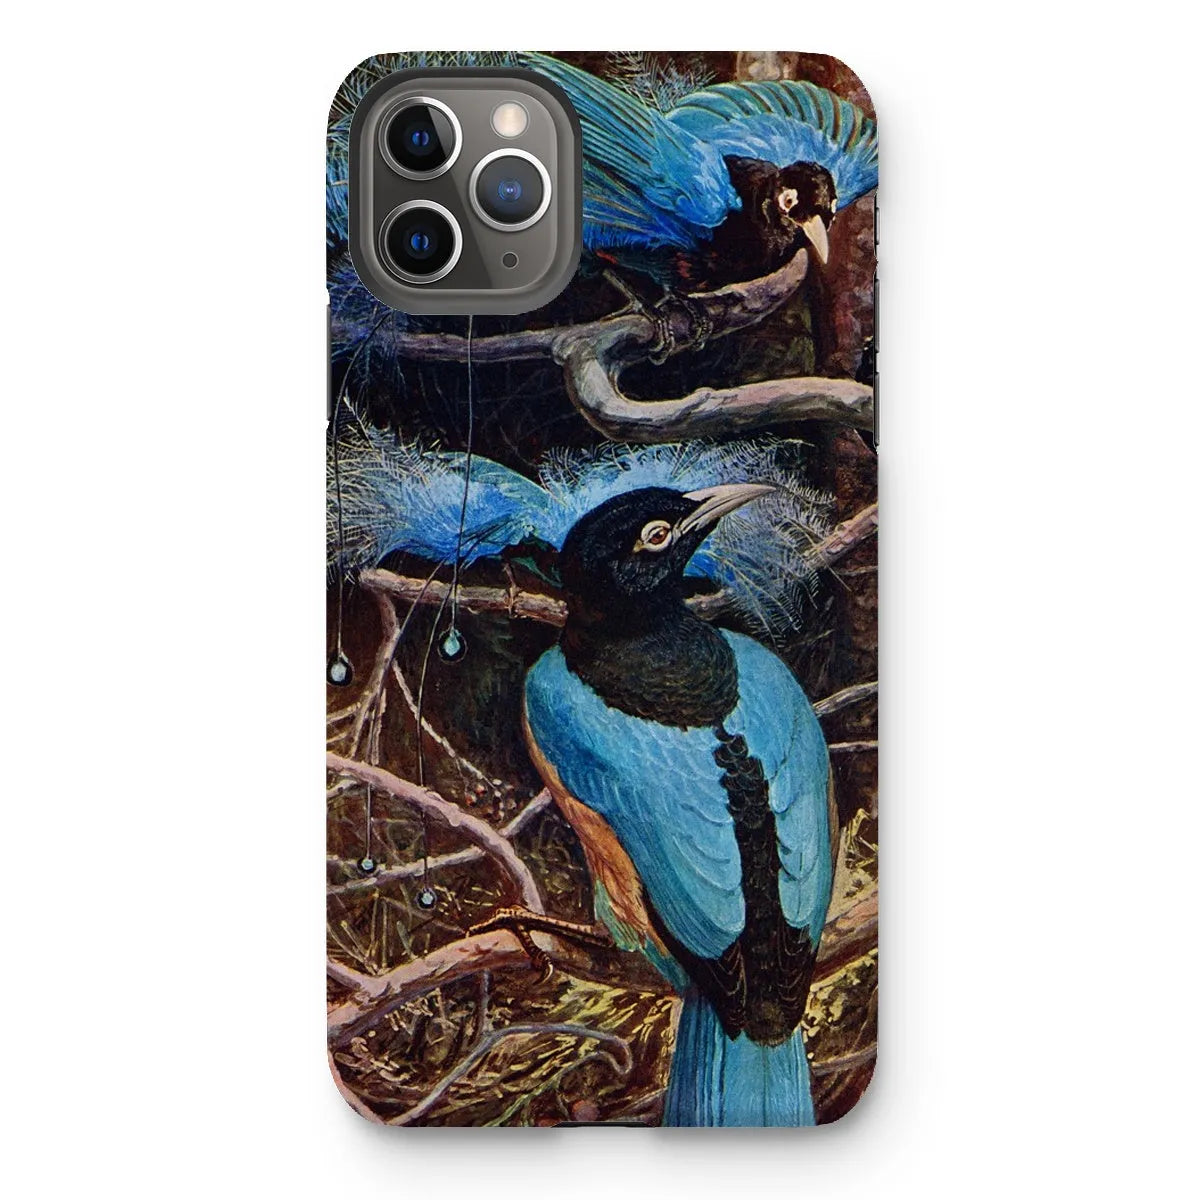 Blue Bird Of Paradise Aesthetic Phone Case - Henry Johnston - Iphone 11 Pro Max / Matte - Mobile Phone Cases